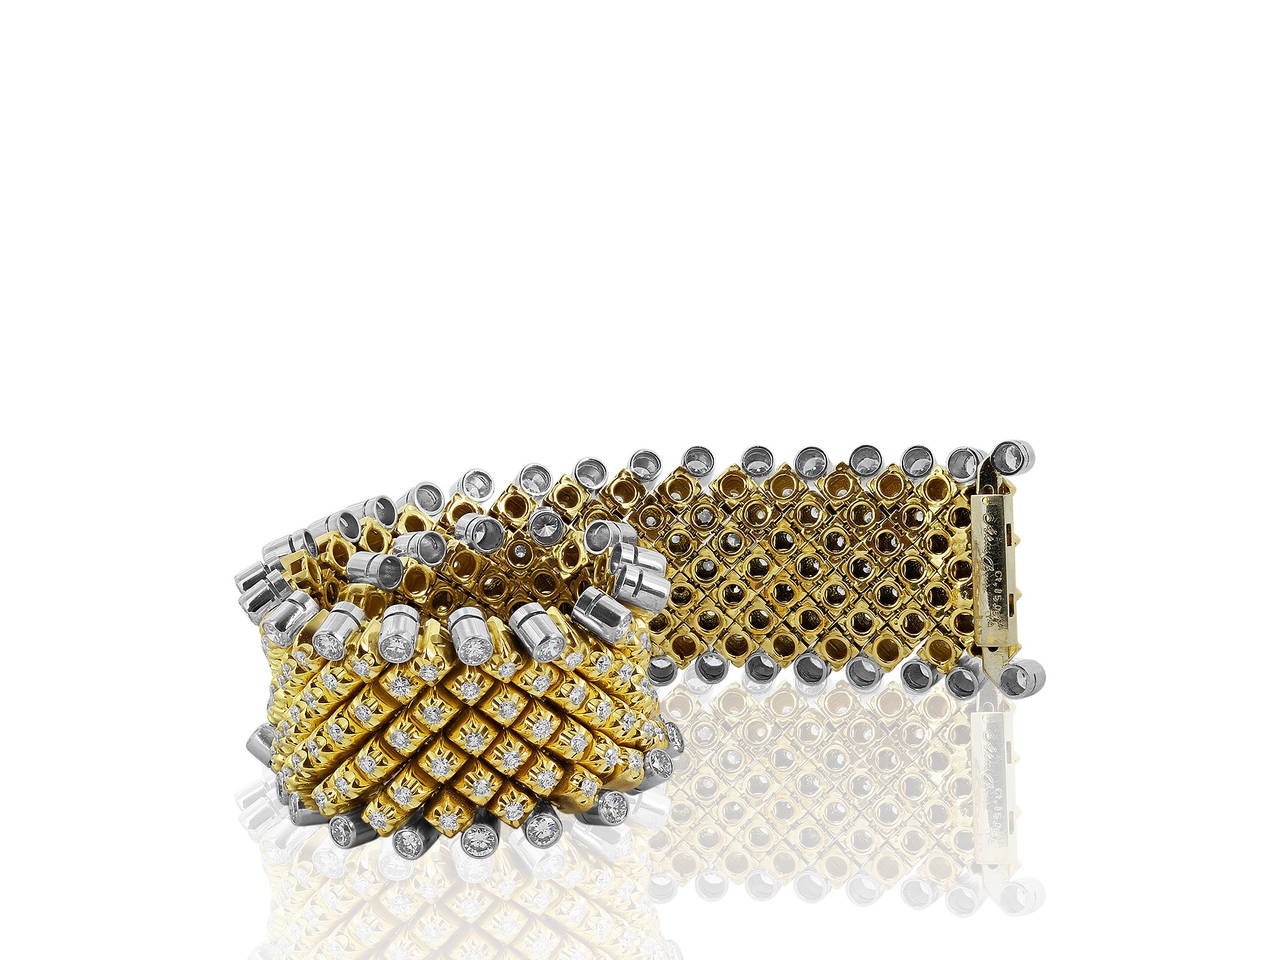 Platinum and 18 karat yellow gold flexible bracelet consisting of 15.06 carats total weight of bezel set round brilliant cut diamonds. Signed Aletto Brother for Shreve, Crump & Low